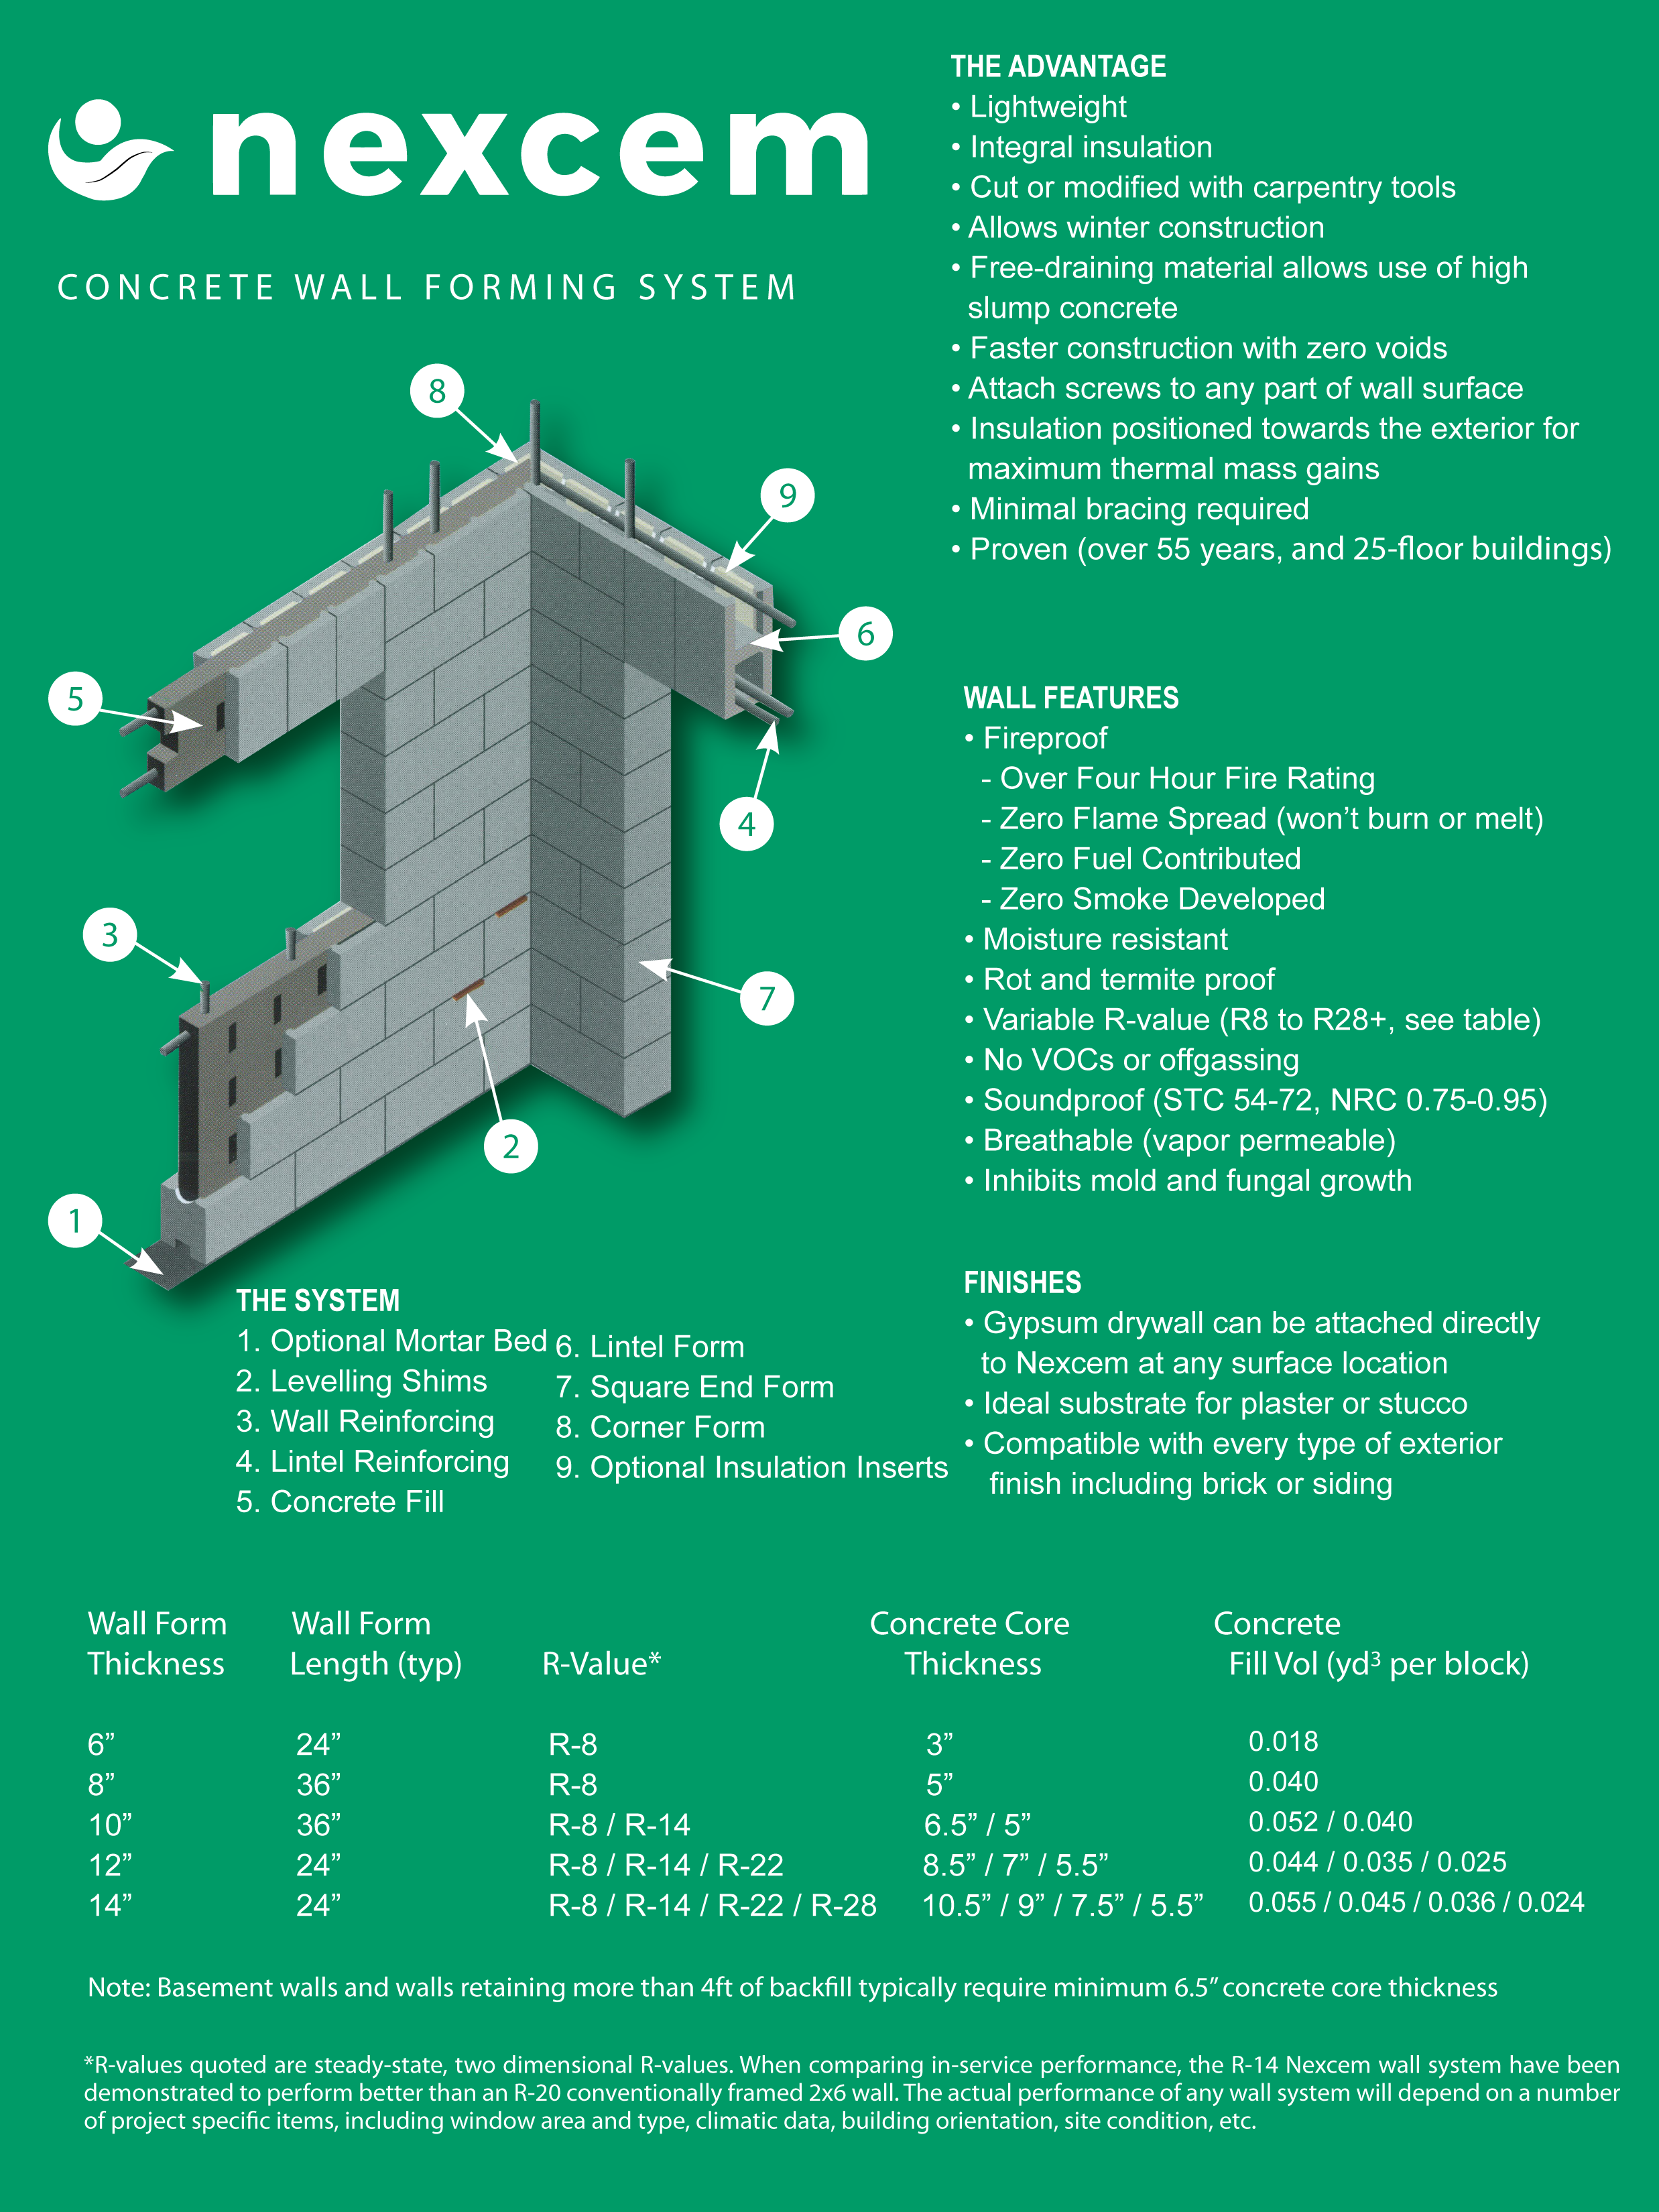 ICF Structural Products